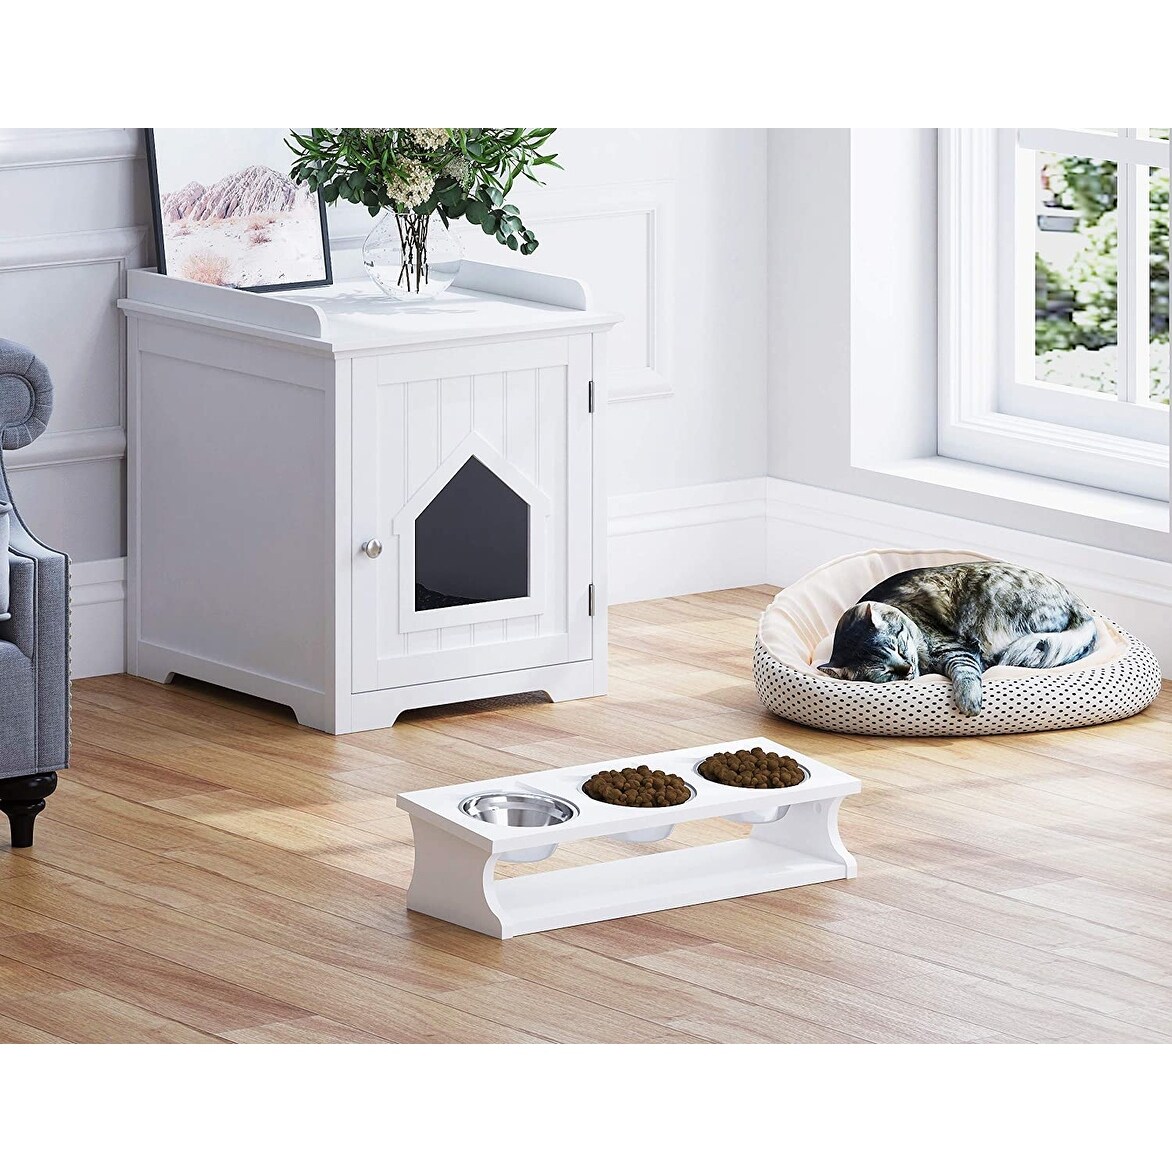 https://ak1.ostkcdn.com/images/products/is/images/direct/8066059acc9a7003ab69aecba26ea2d7966ae399/PAWLAND-Raised-Cat-Bowls-Elevated-Stainless-Steel-Dog-Cat-Bowls-with-Stand-Pet-Feeder-Food-Water-Bowls-for-Cats-and-Small-Dogs.jpg